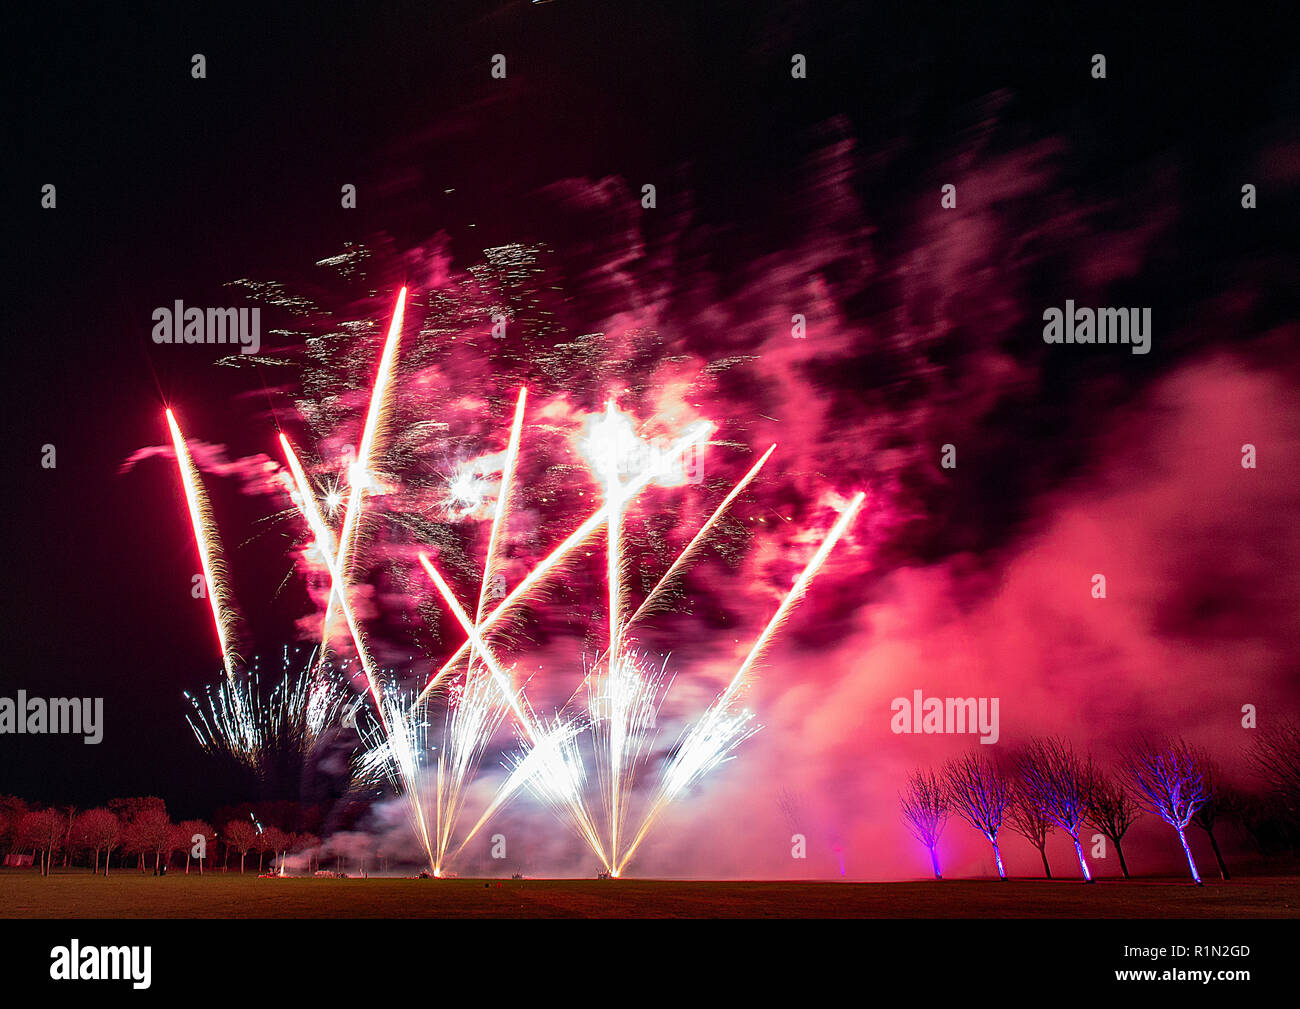 Spectacular and colourful firework display set against a dark Autumn sky in Lancashire, celebrating Guy Fawkes Night Stock Photo